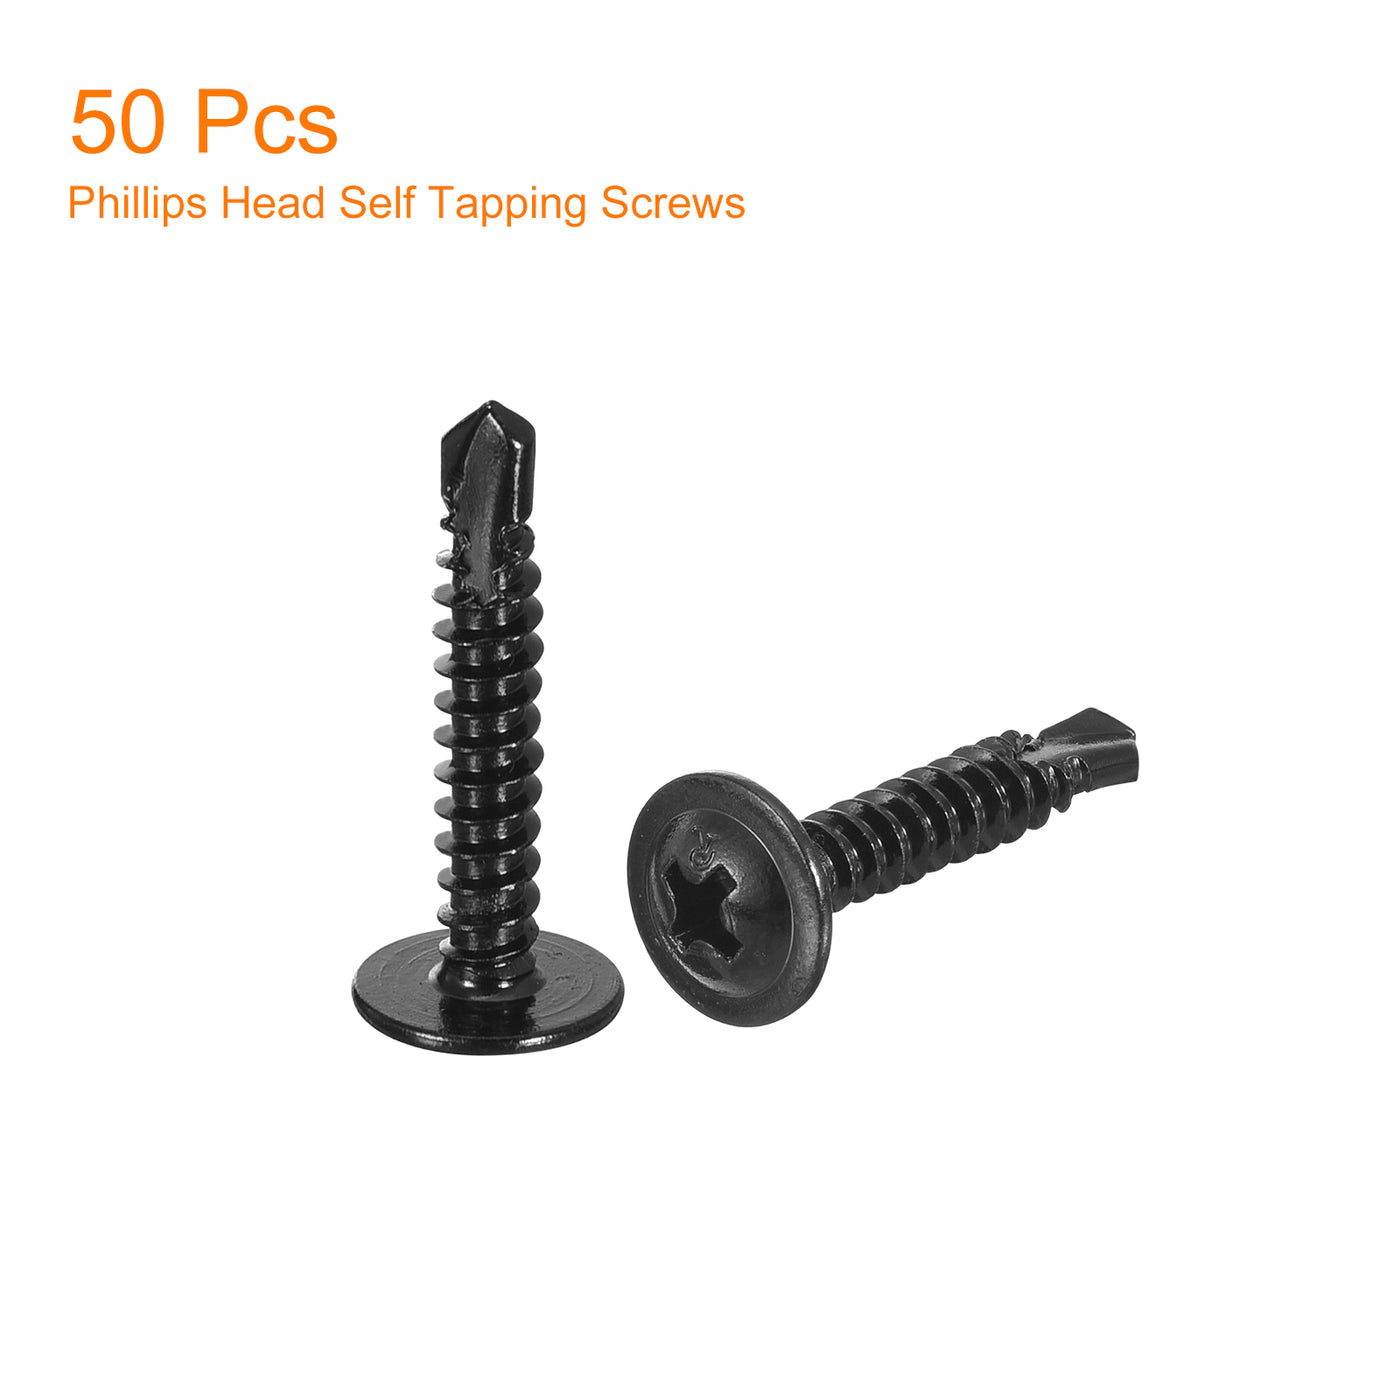 uxcell Uxcell Phillips Head Self Tapping Screws, 50pcs #8x1" Sheet Metal Screw